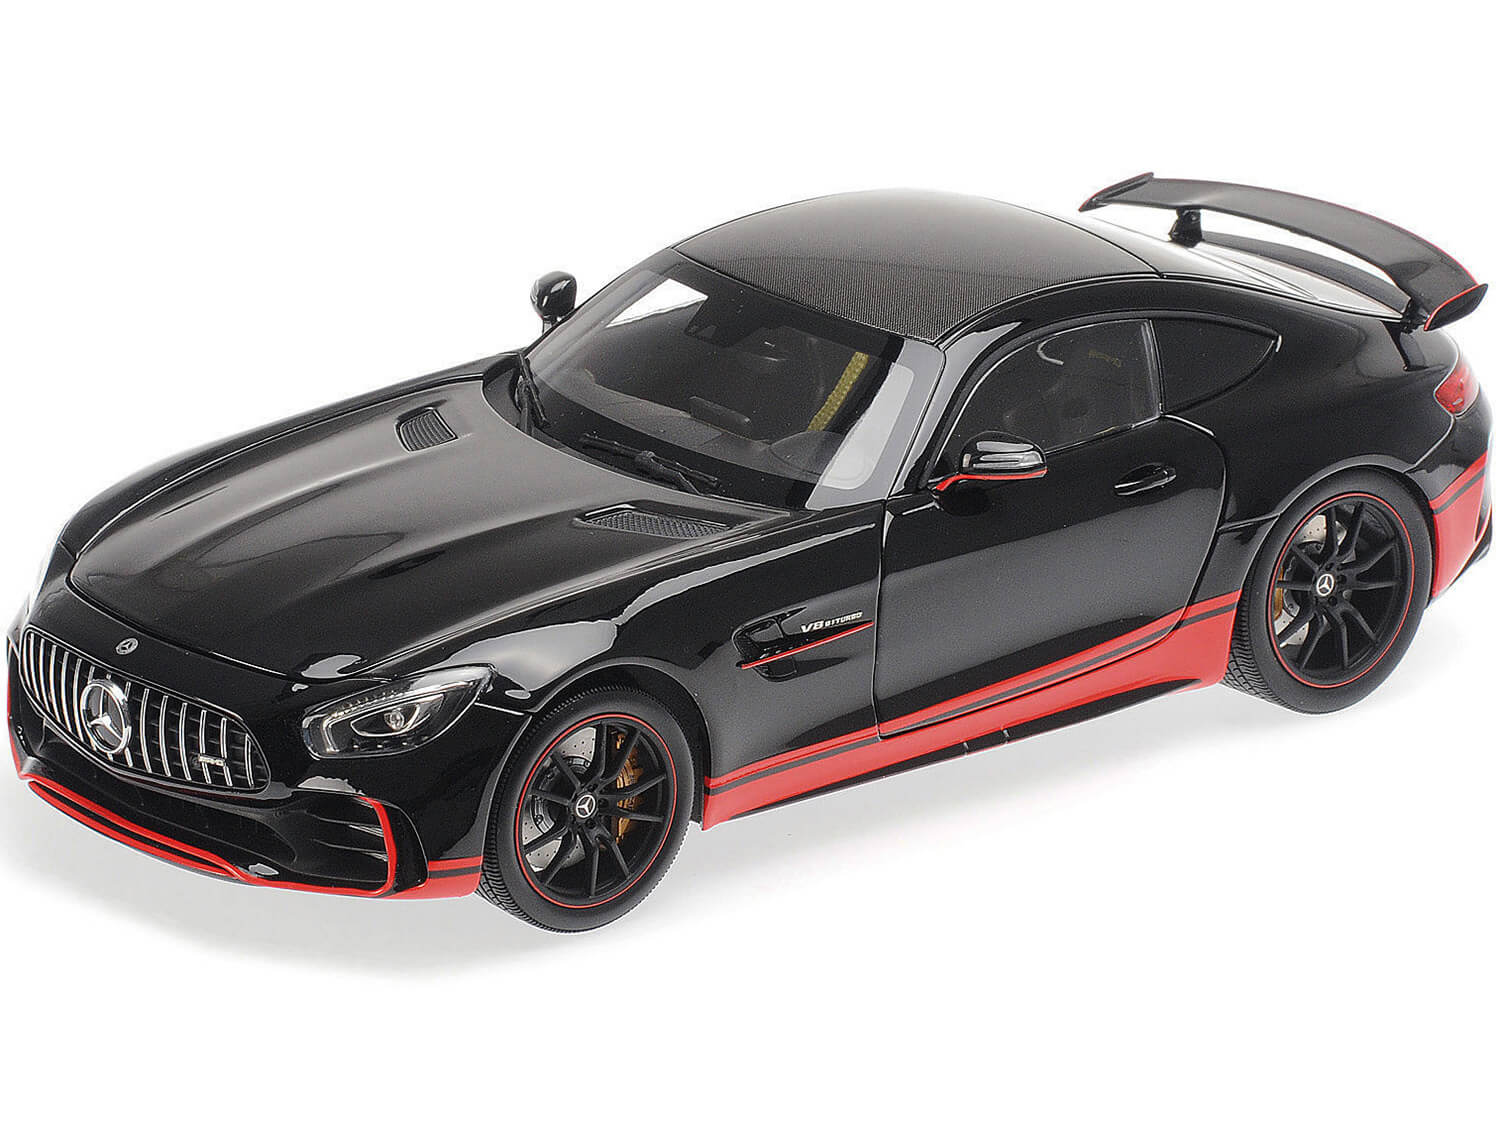 2017 Mercedes AMG GT R Glossy Black with Red Stripes and Carbon Top 1/18 Diecast Model Car by Almost Real